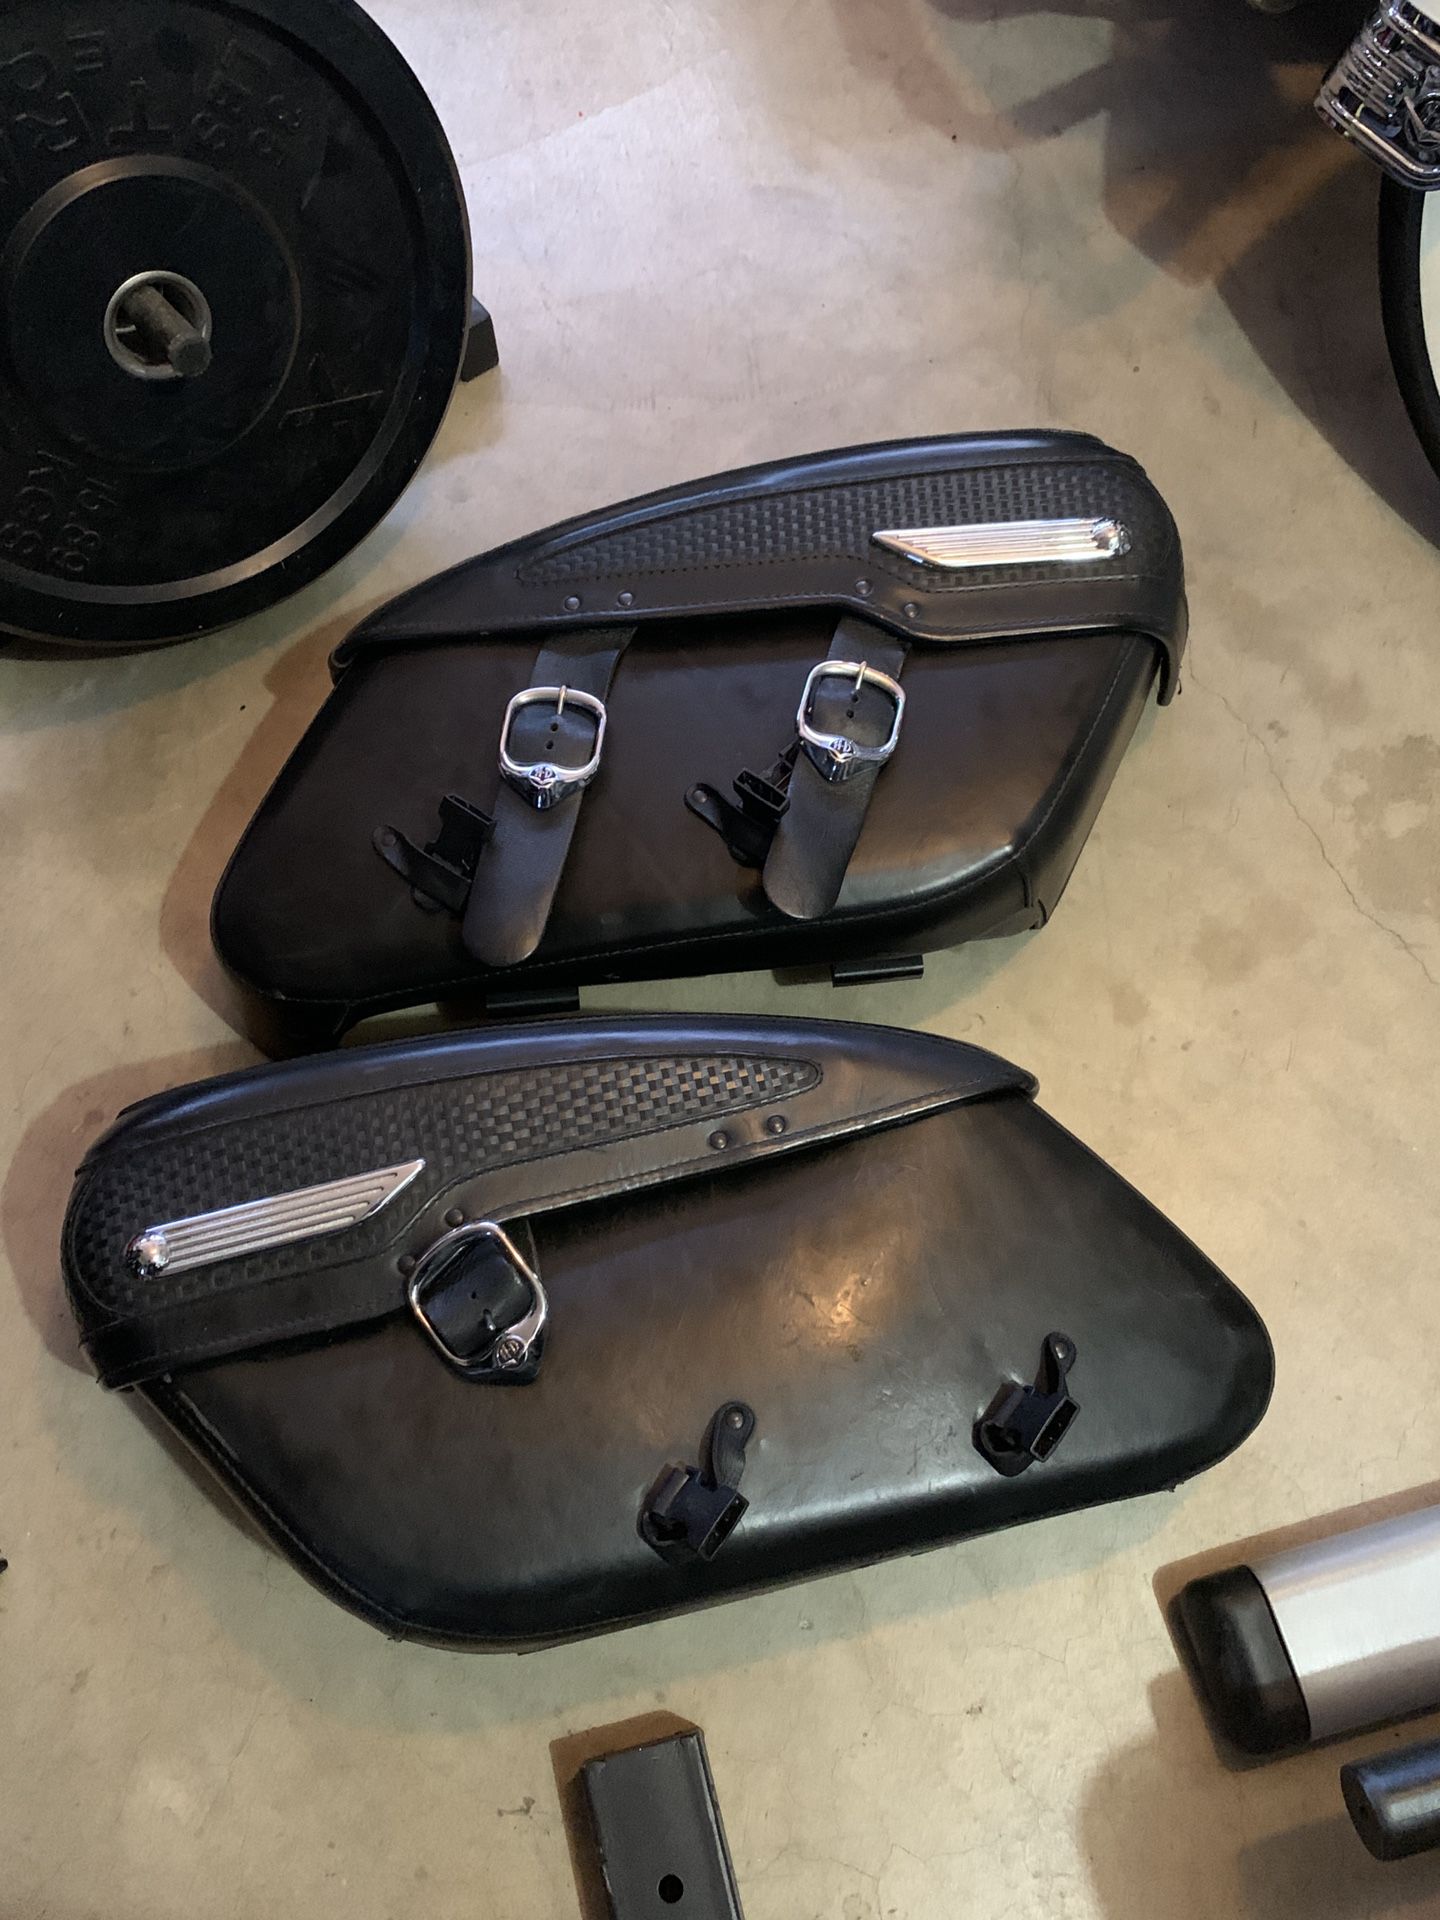 Harley saddlebags off a 04 road king classic